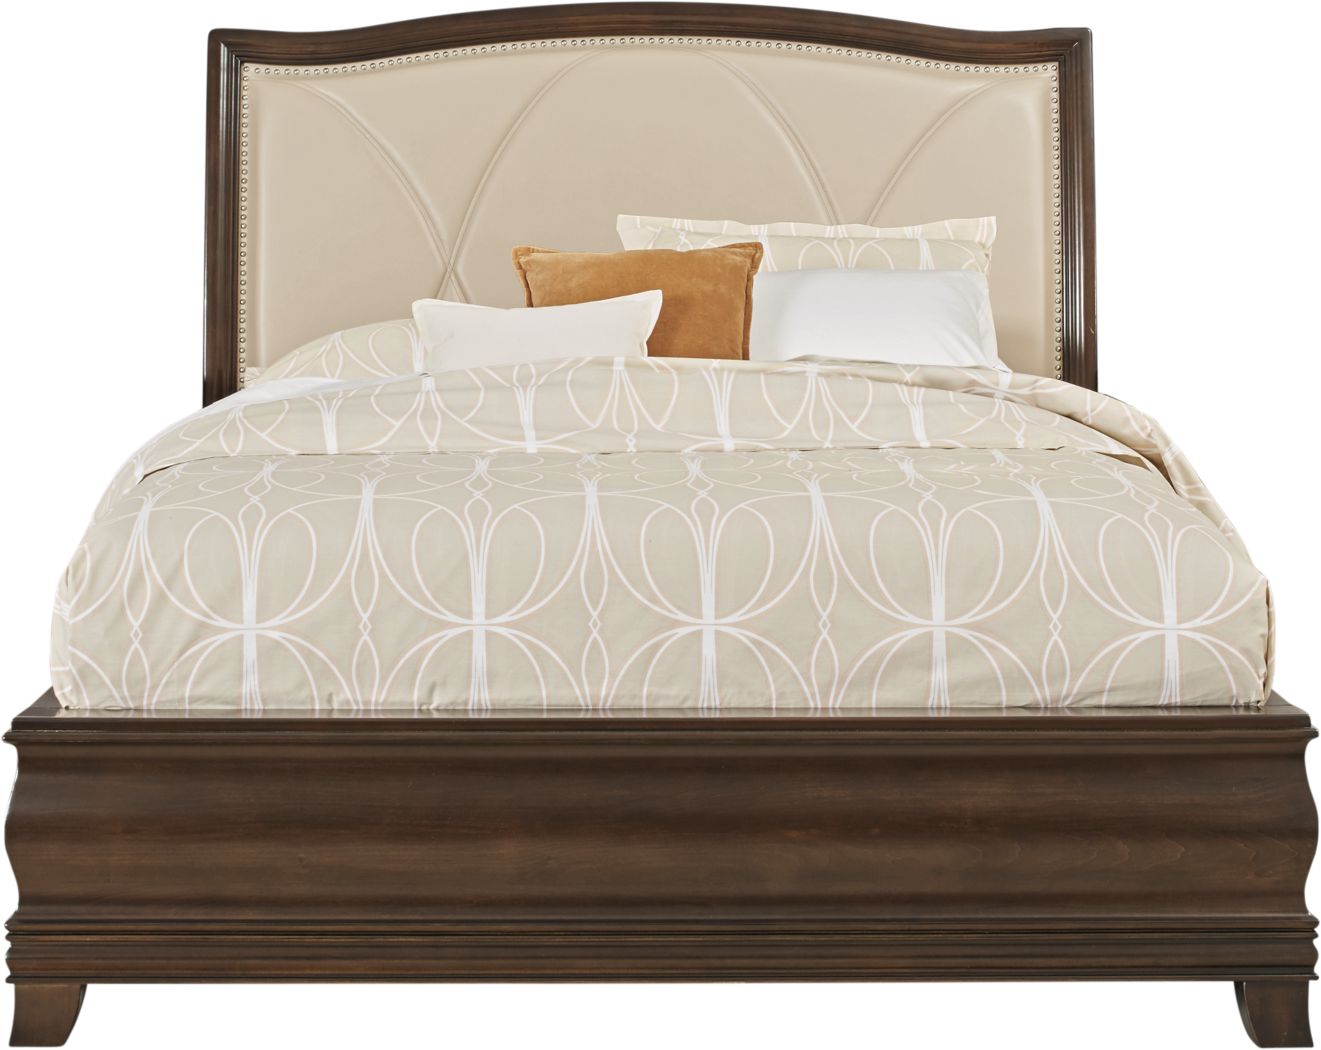 Cherry King Size Beds Frames, Cherry Wood King Size Bed Frame With Headboard